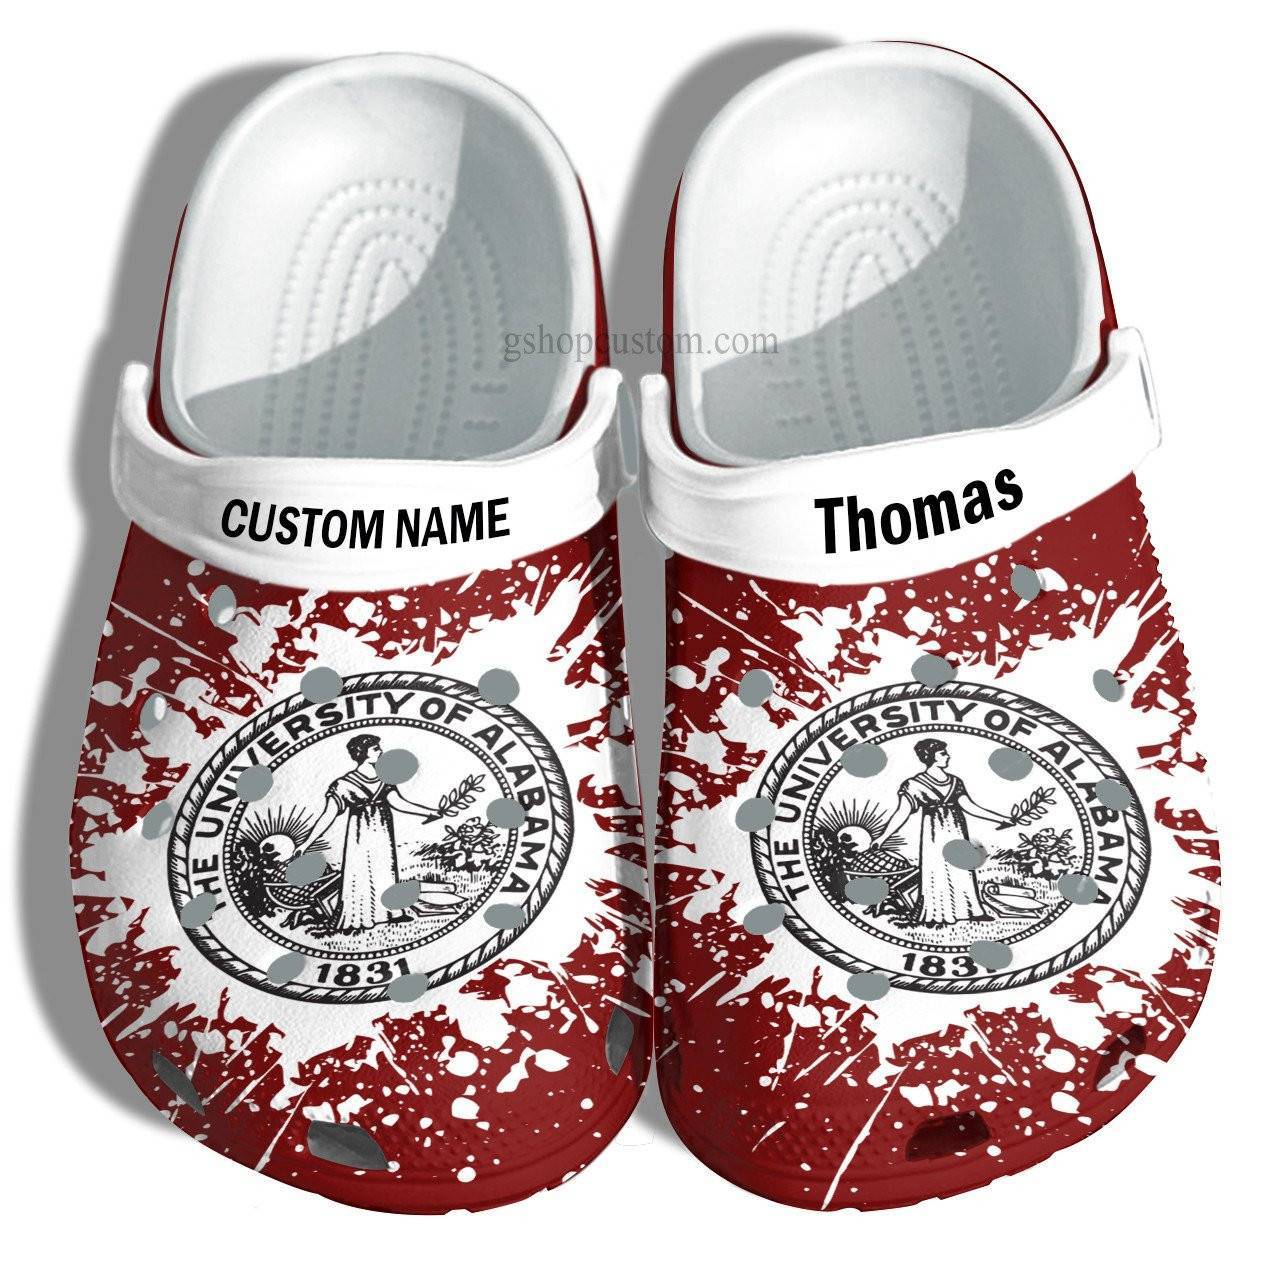 The University Of Alabama Graduation Gifts Croc Shoes Customize – Admission Gift Crocss Shoes